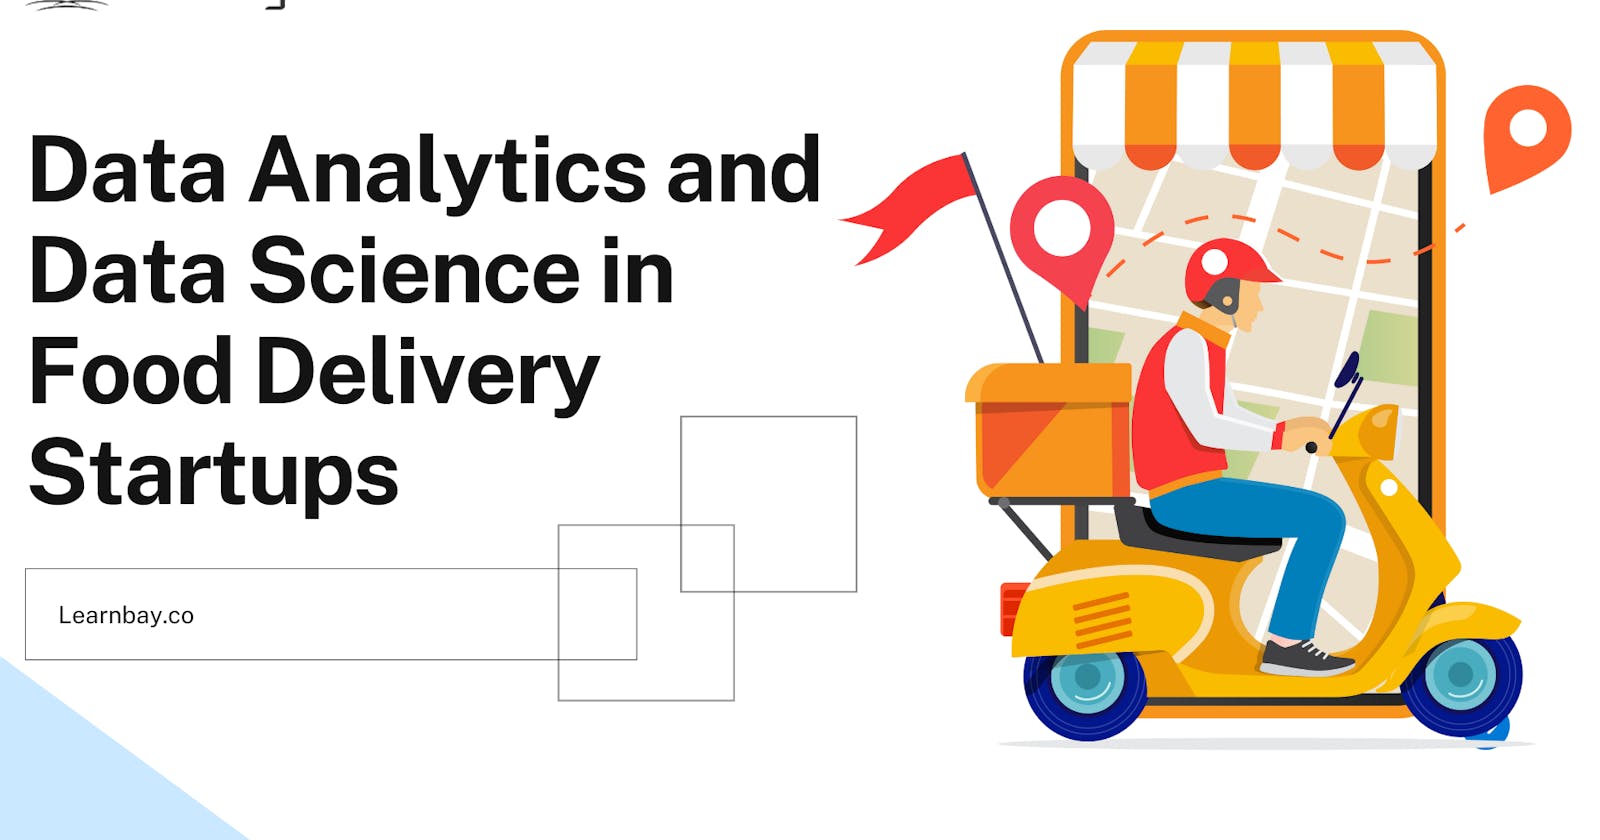 Data Analytics and Data Science in Food Delivery Startups